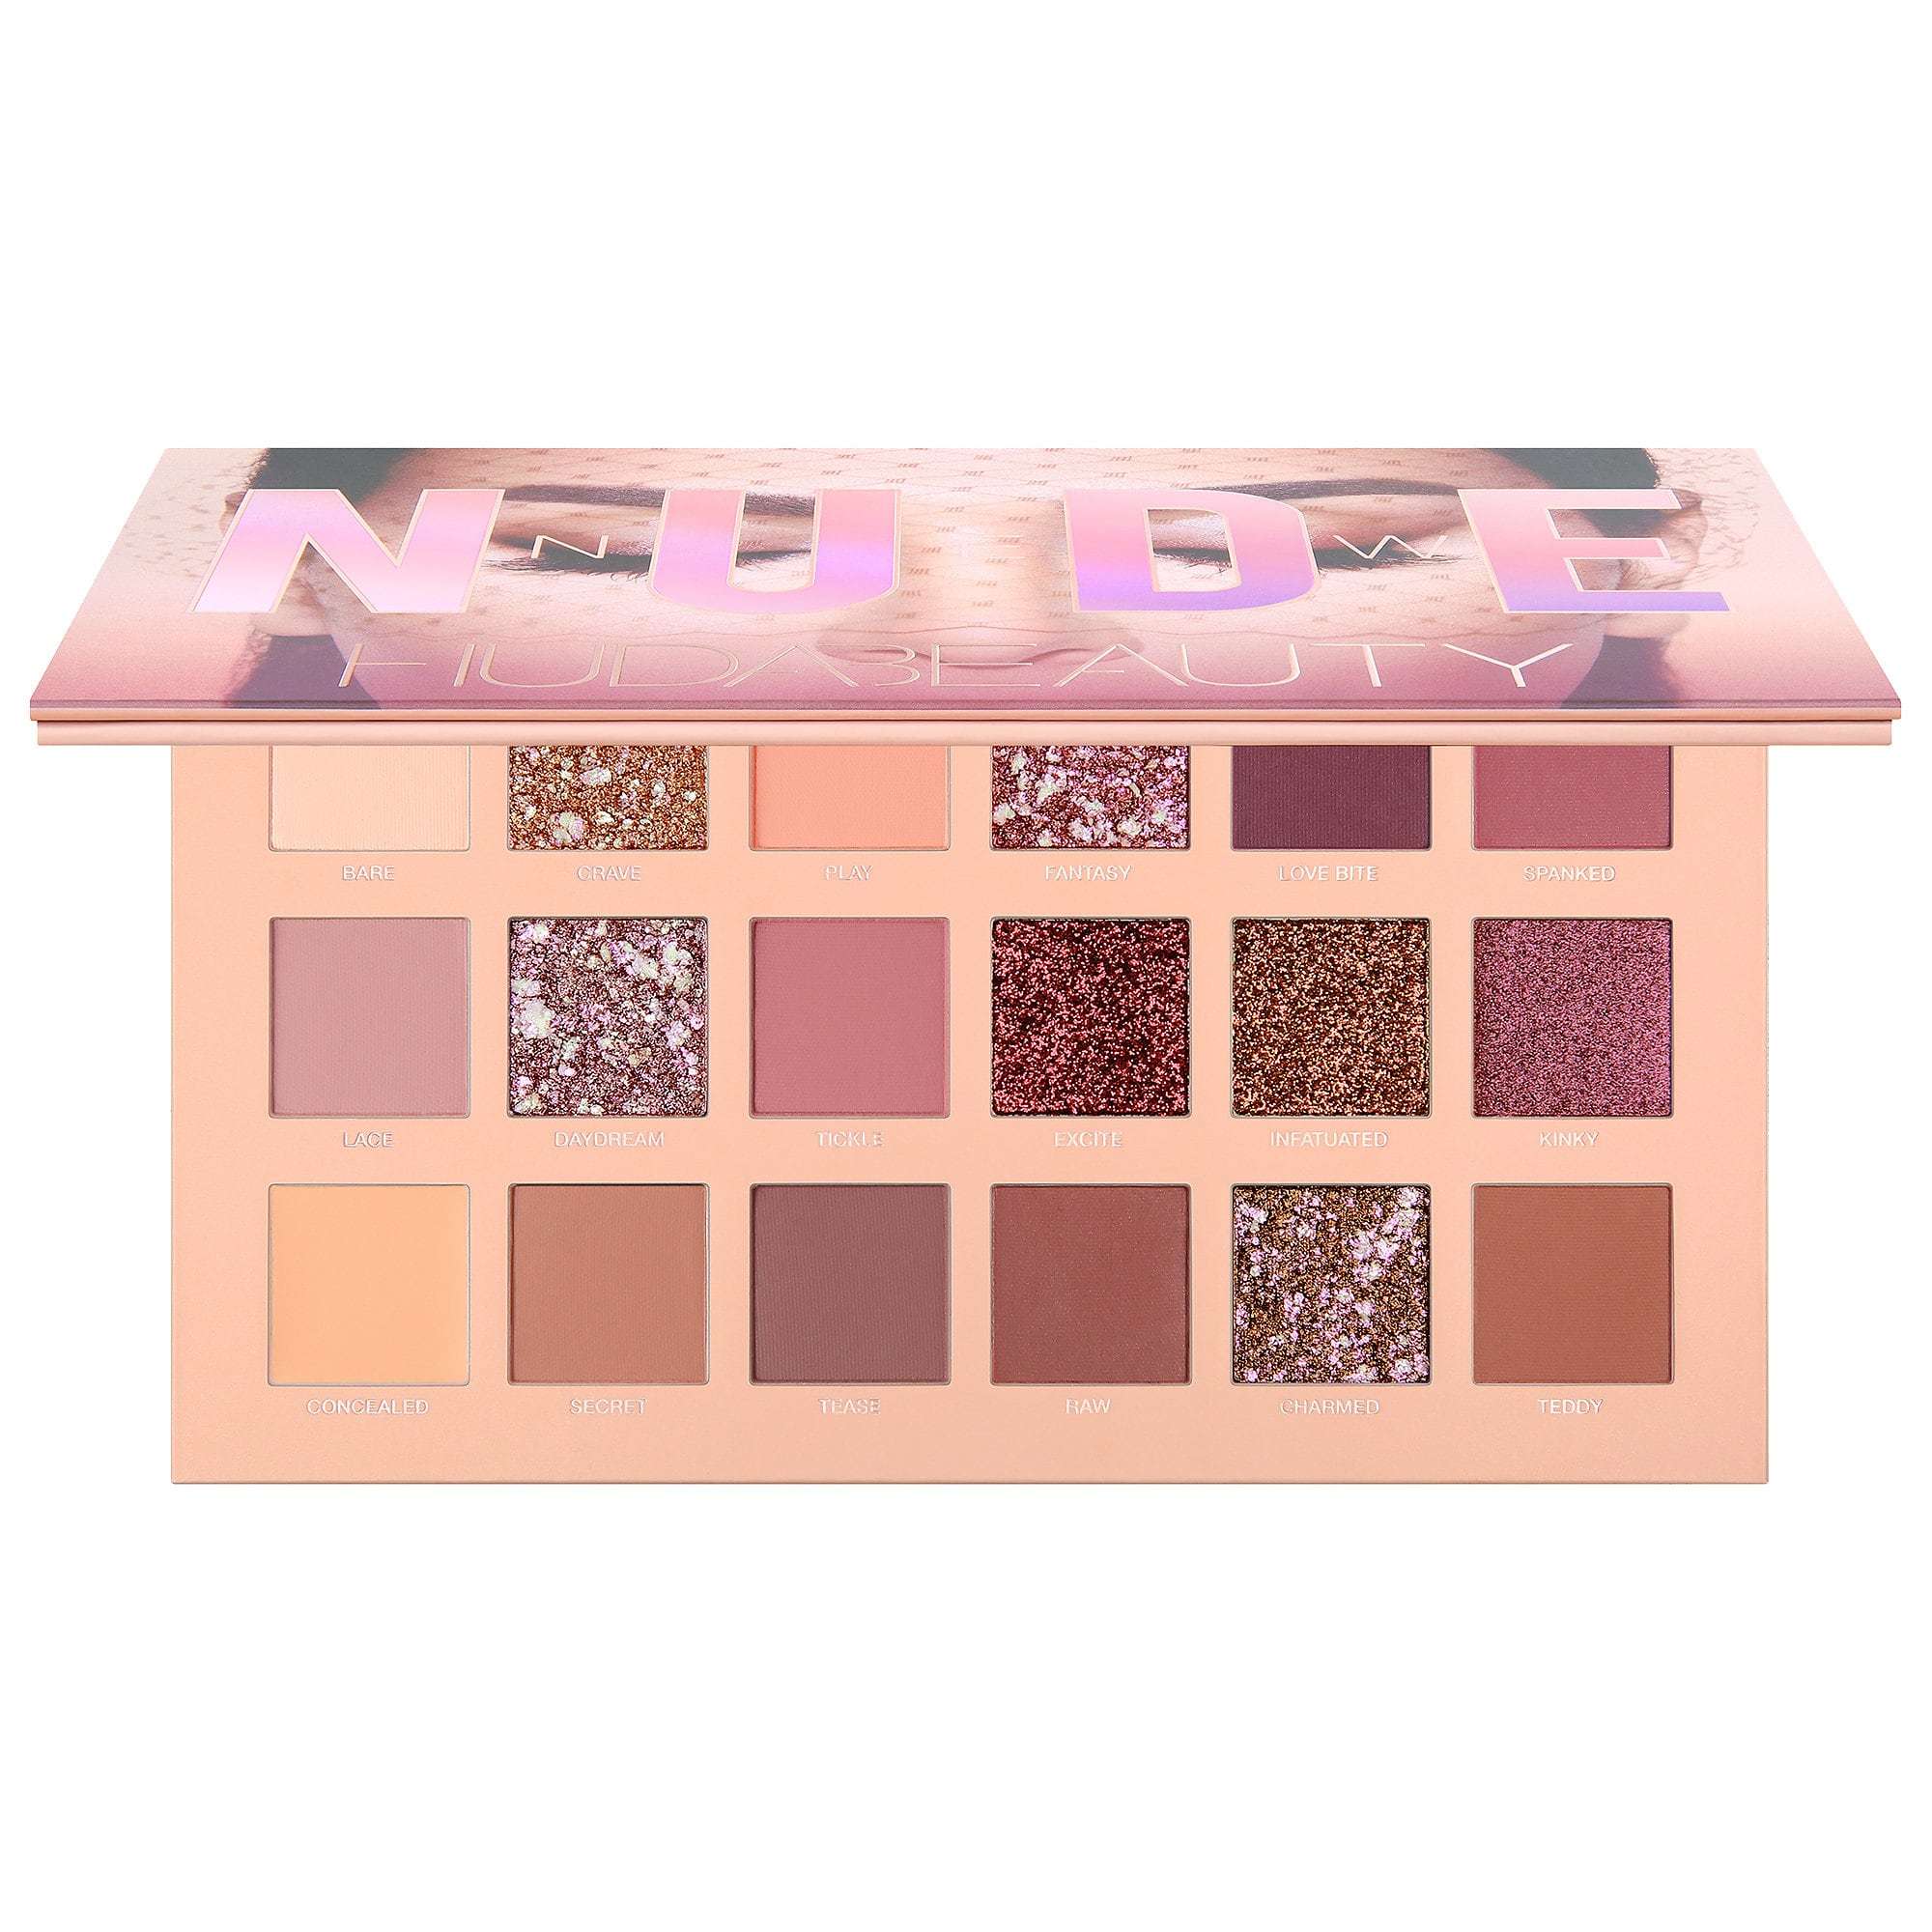 The New Nude Palette